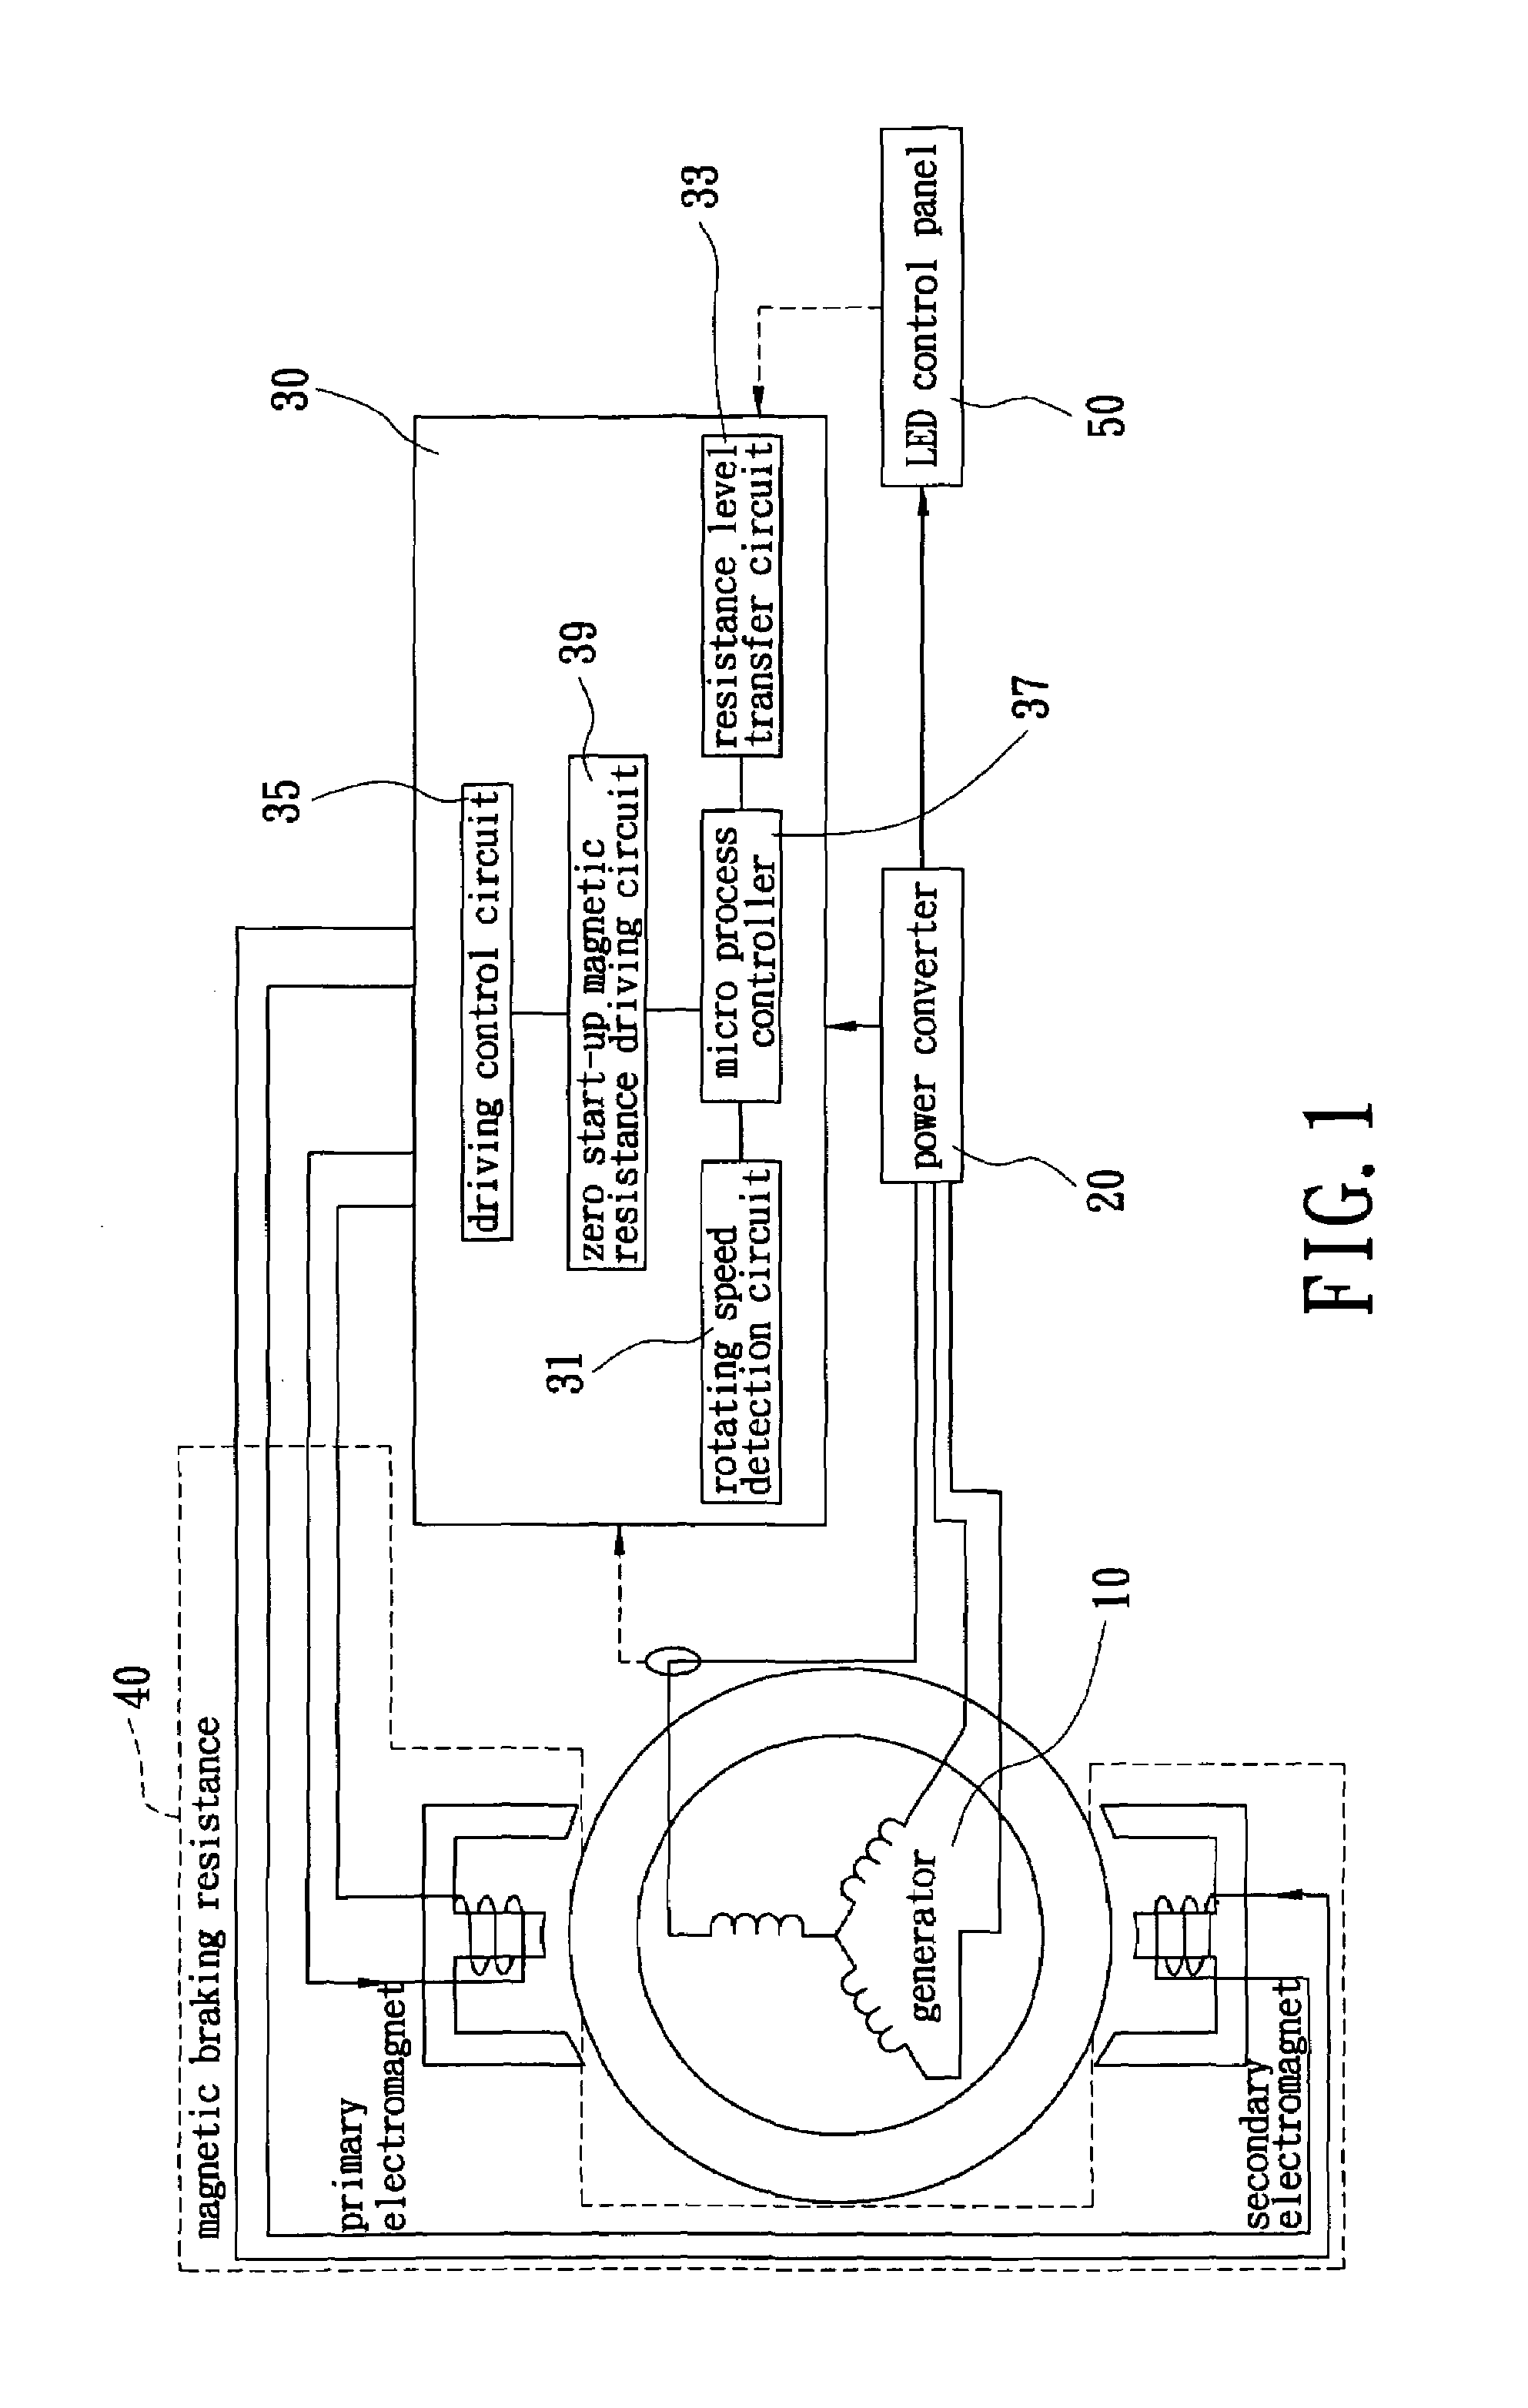 Self-sourcing exercise bike with a linear digital control magnetic resistance braking apparatus